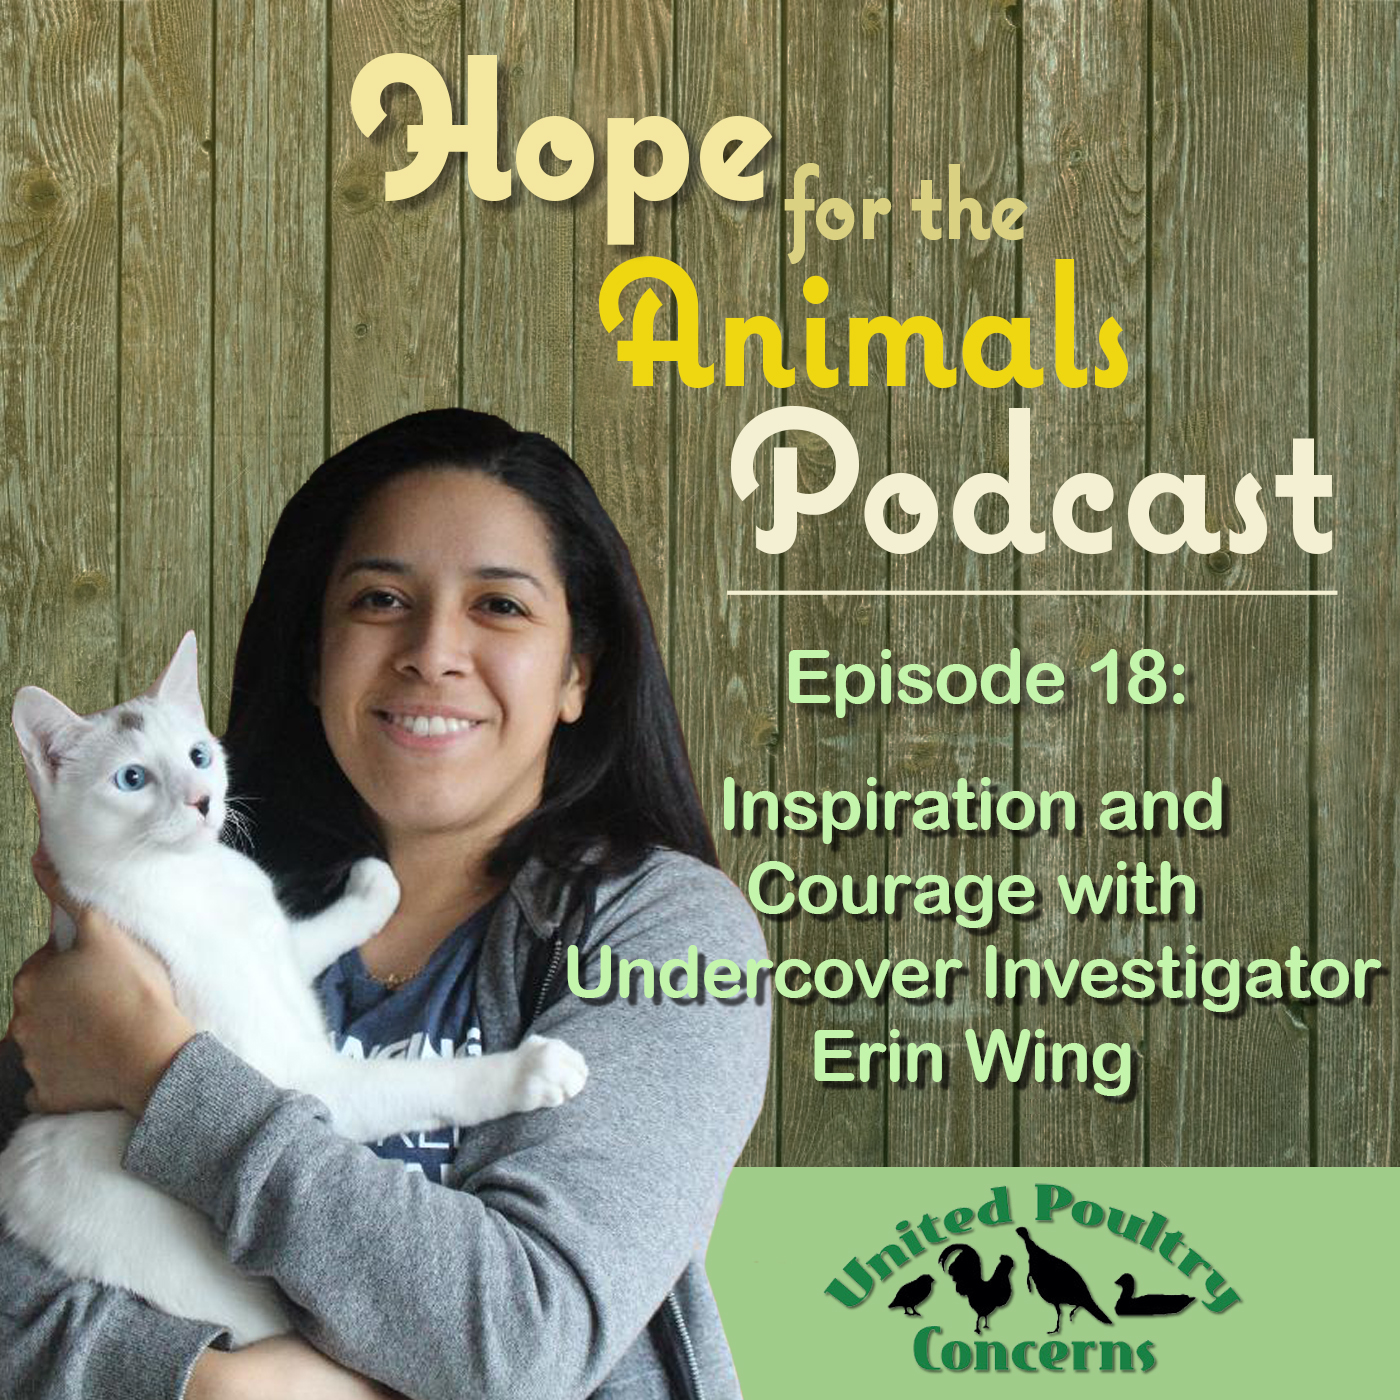 Episode 18: Inspiration and Courage with Undercover Investigator Erin Wing